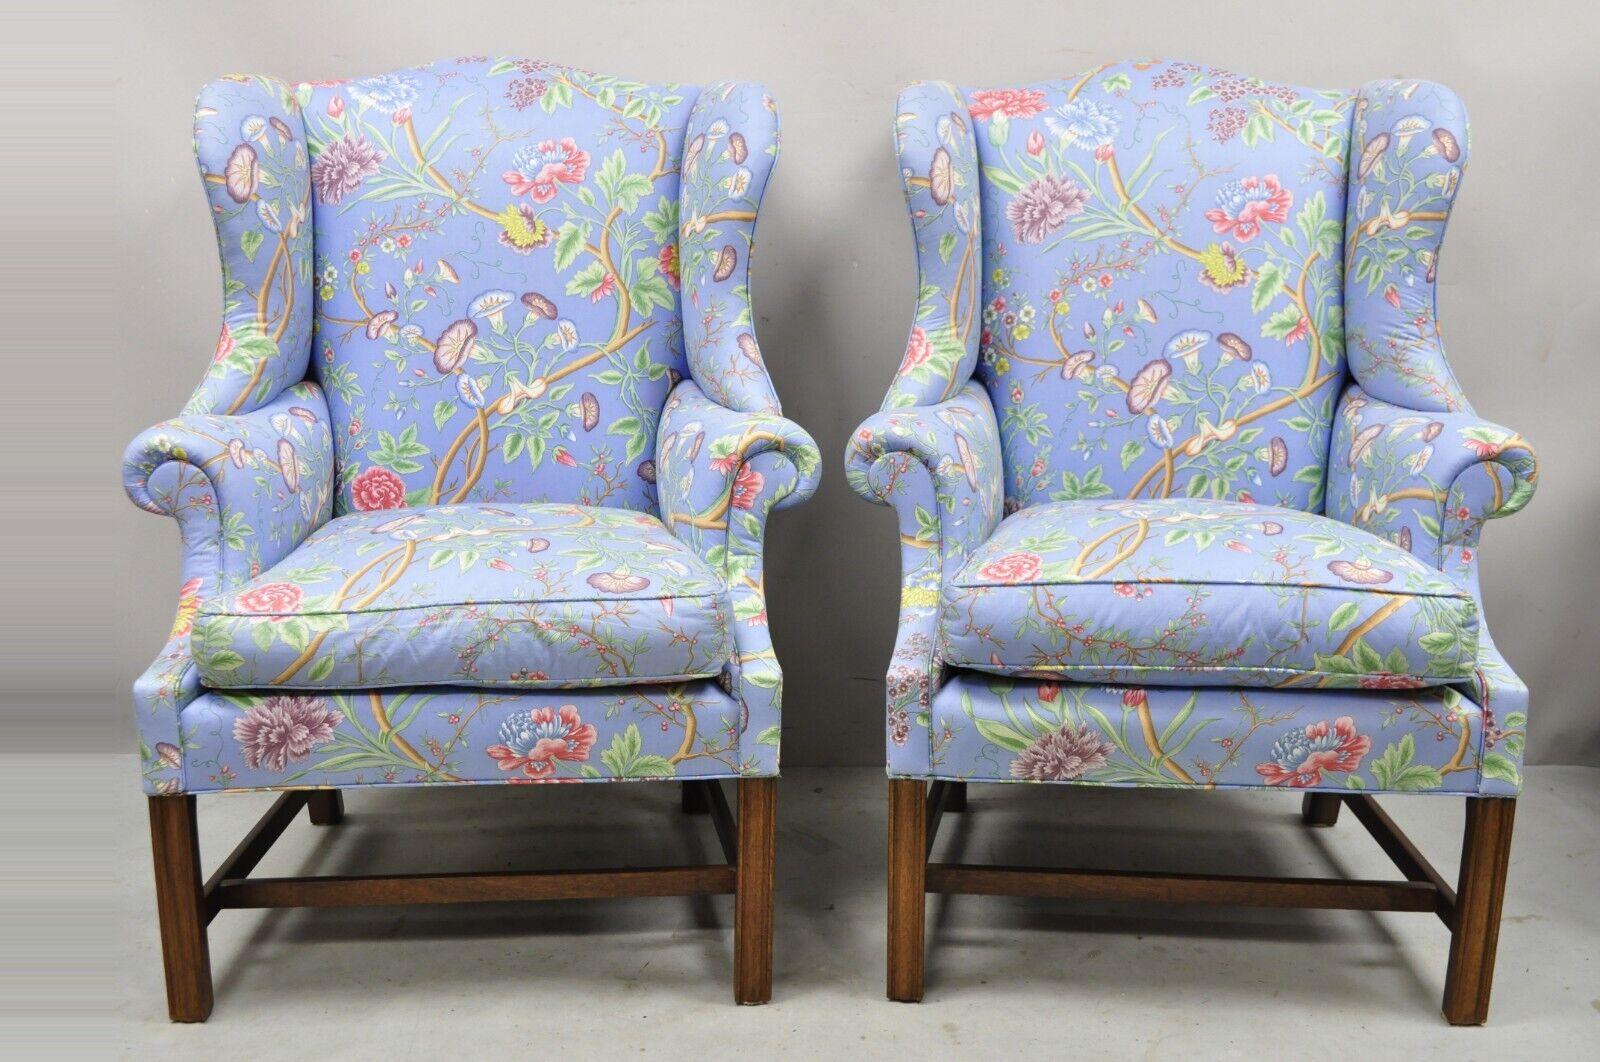 Vintage English Edwardian style mahogany blue floral wingback chairs - a pair. Item features shapely rolled arms and winged backs, blue floral print upholstery, stretcher base, solid wood frames, quality American craftsmanship, great style and form.